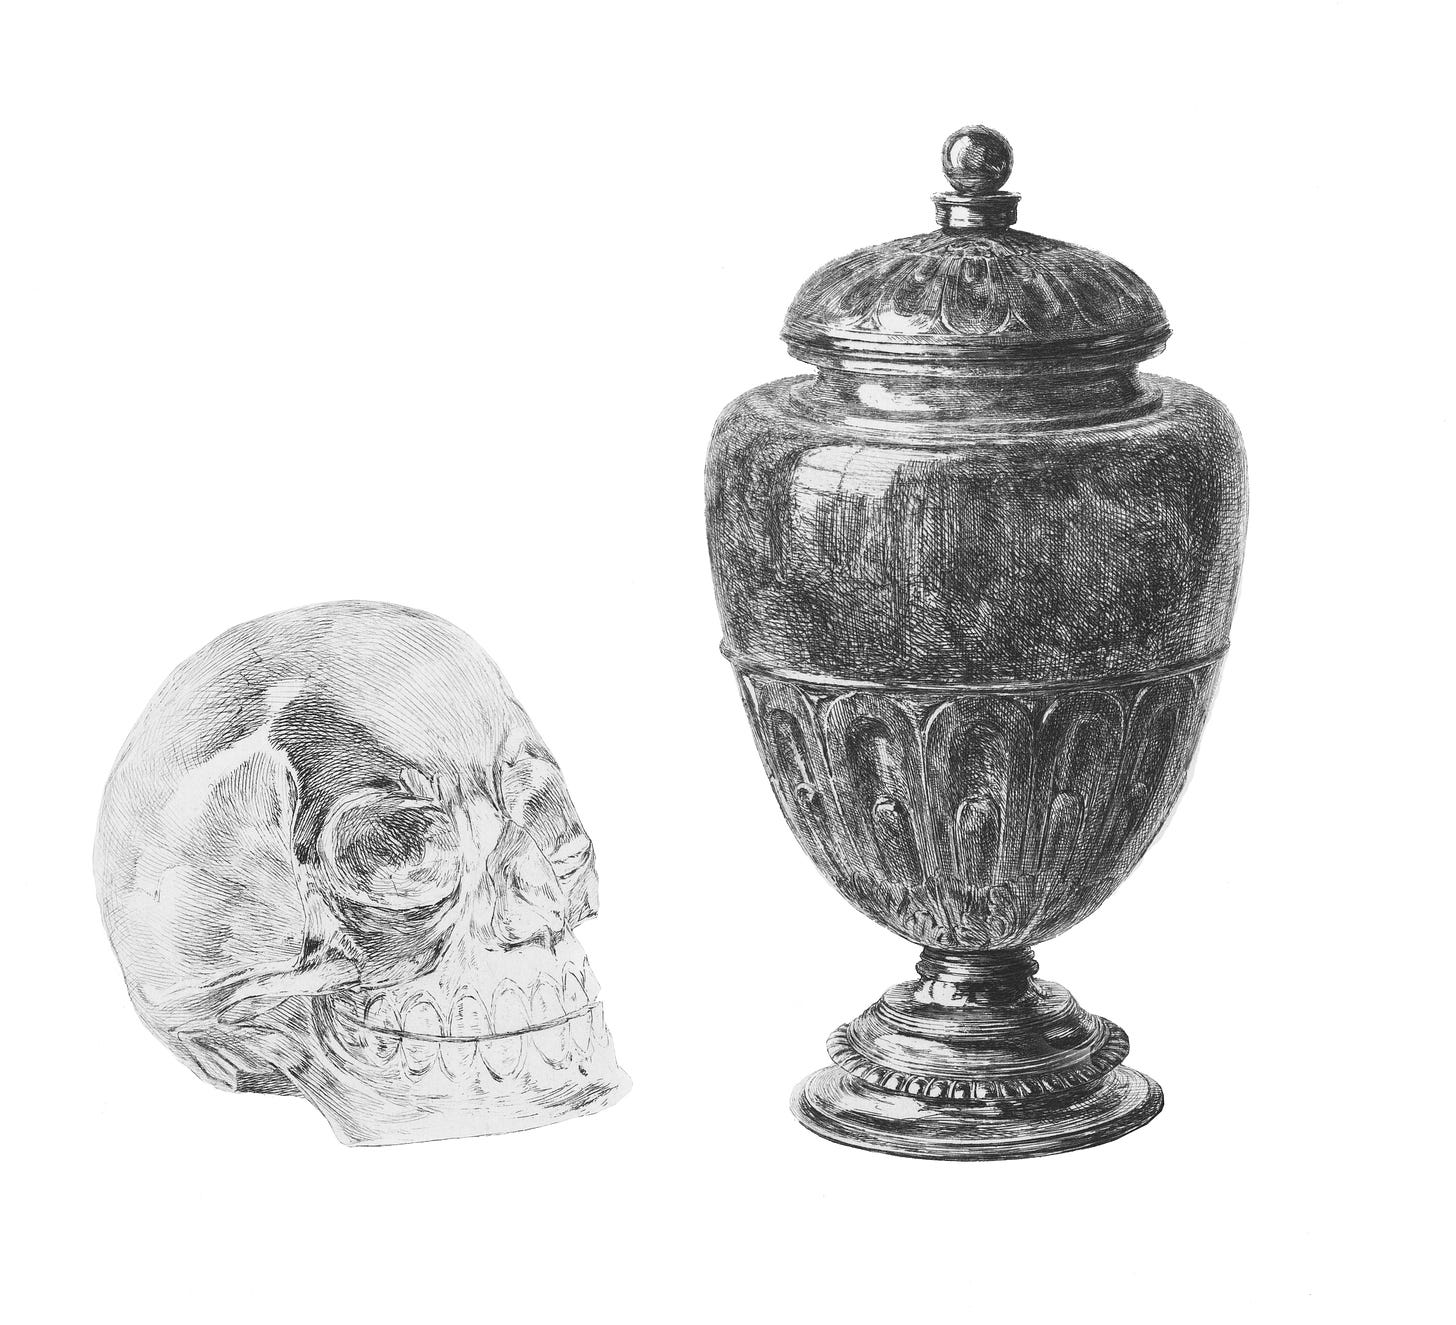 Black and white illustration of a jade vase and a crystal skull